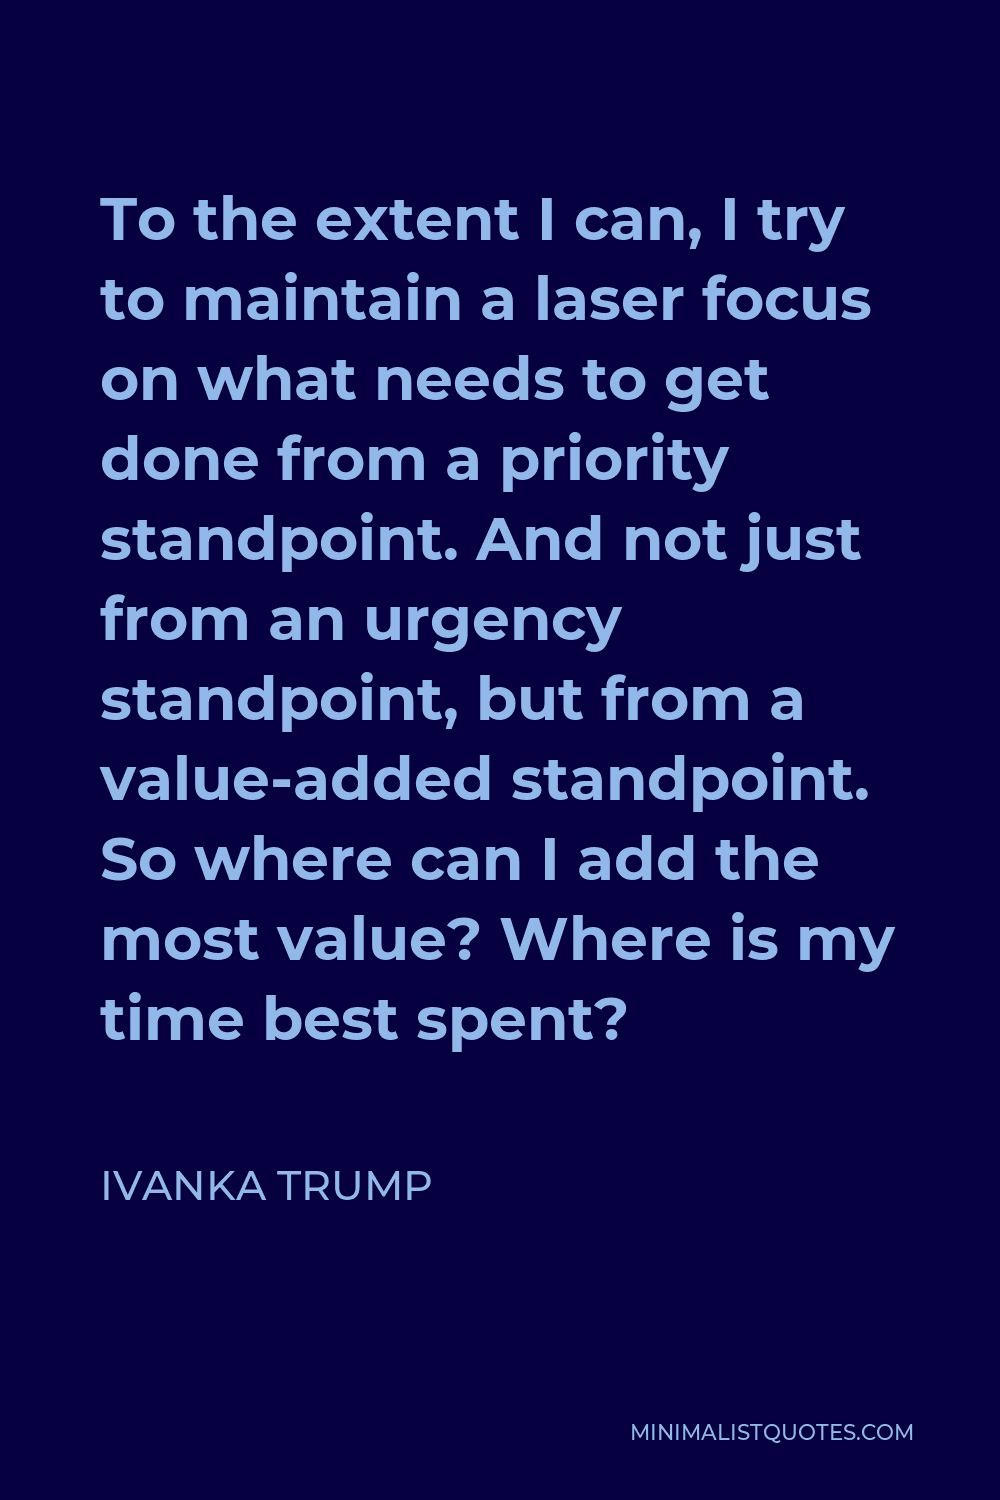 Ivanka Trump Quote - To the extent I can, I try to maintain a laser focus on what needs to get done from a priority standpoint. And not just from an urgency standpoint, but from a value-added standpoint. So where can I add the most value? Where is my time best spent?